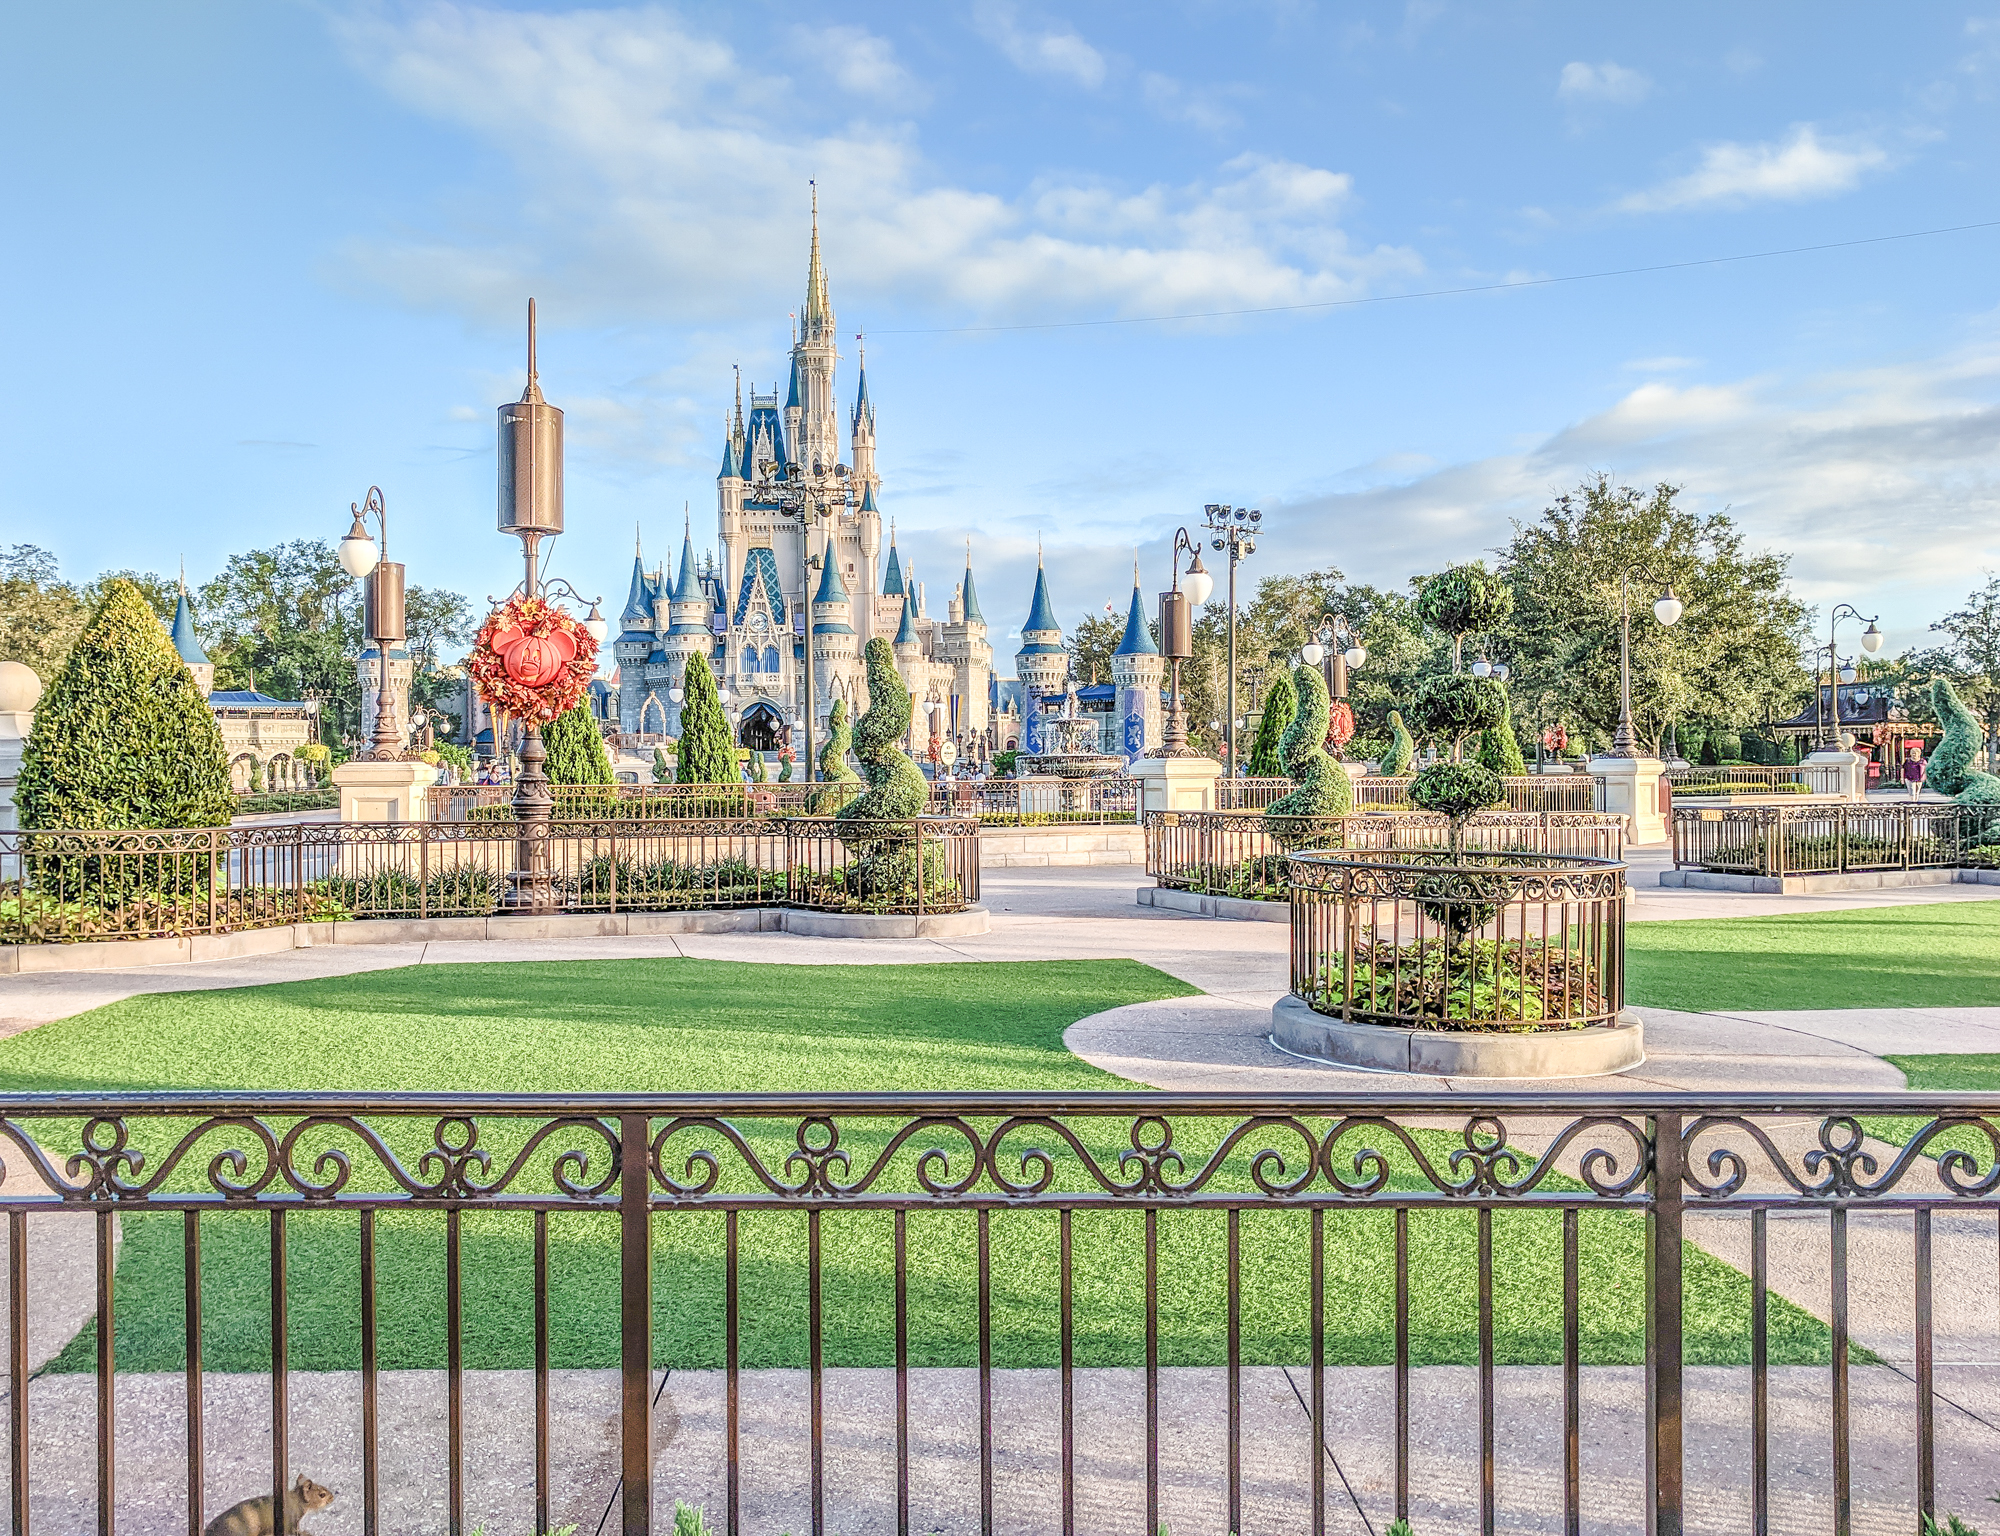 How to Do All 4 Disney Parks in 1 Day: A Super Detailed Guide